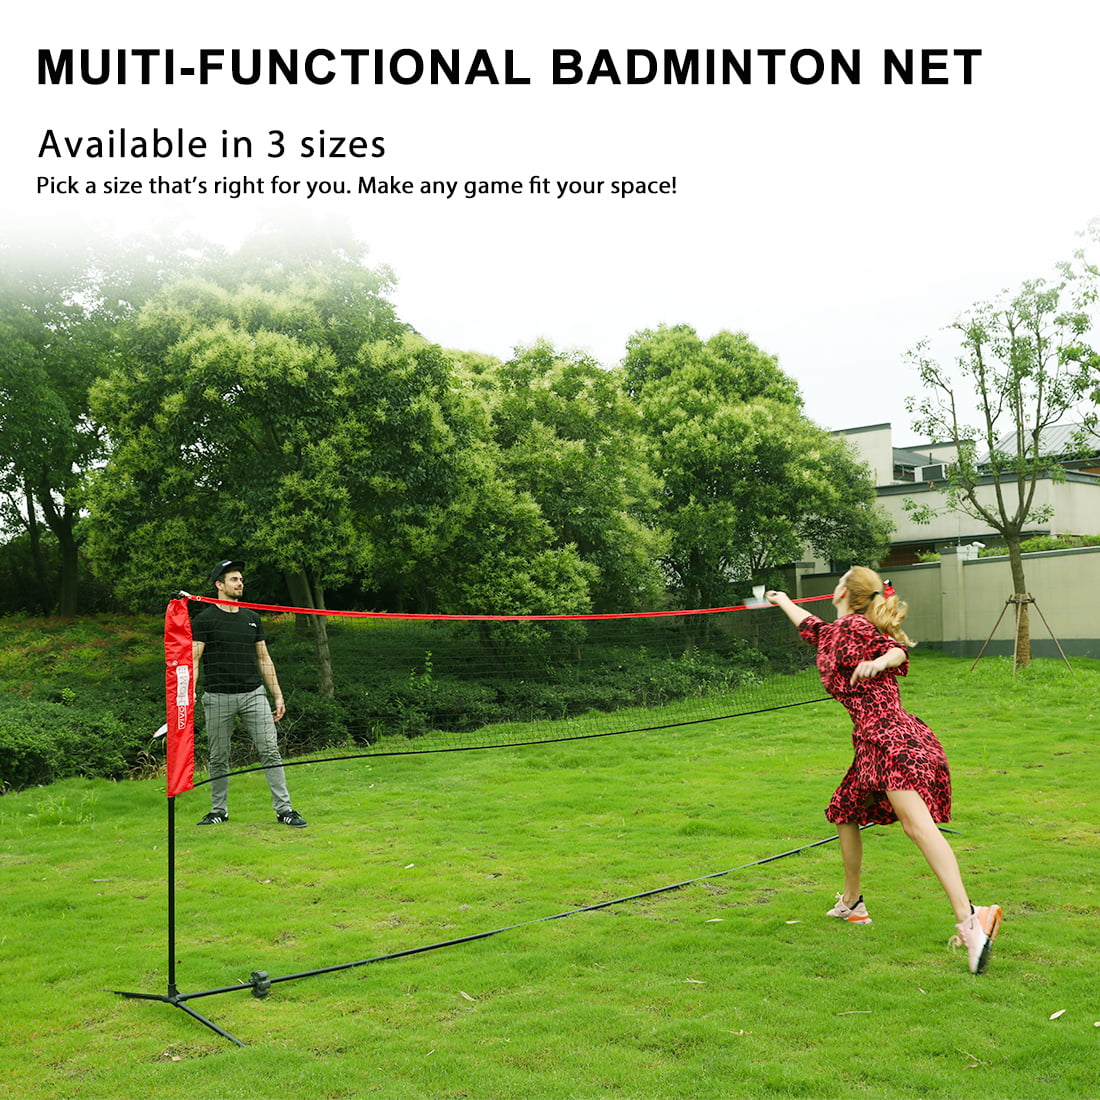 Driveway Indoor Outdoor Beach Street Backyard Setup Collapsible Easy to Carry QERNTPEY Badminton Net Badminton Tennis Volleyball Pickleball Net Nd Frame Color : Red, Size : 3.1x1.55m 